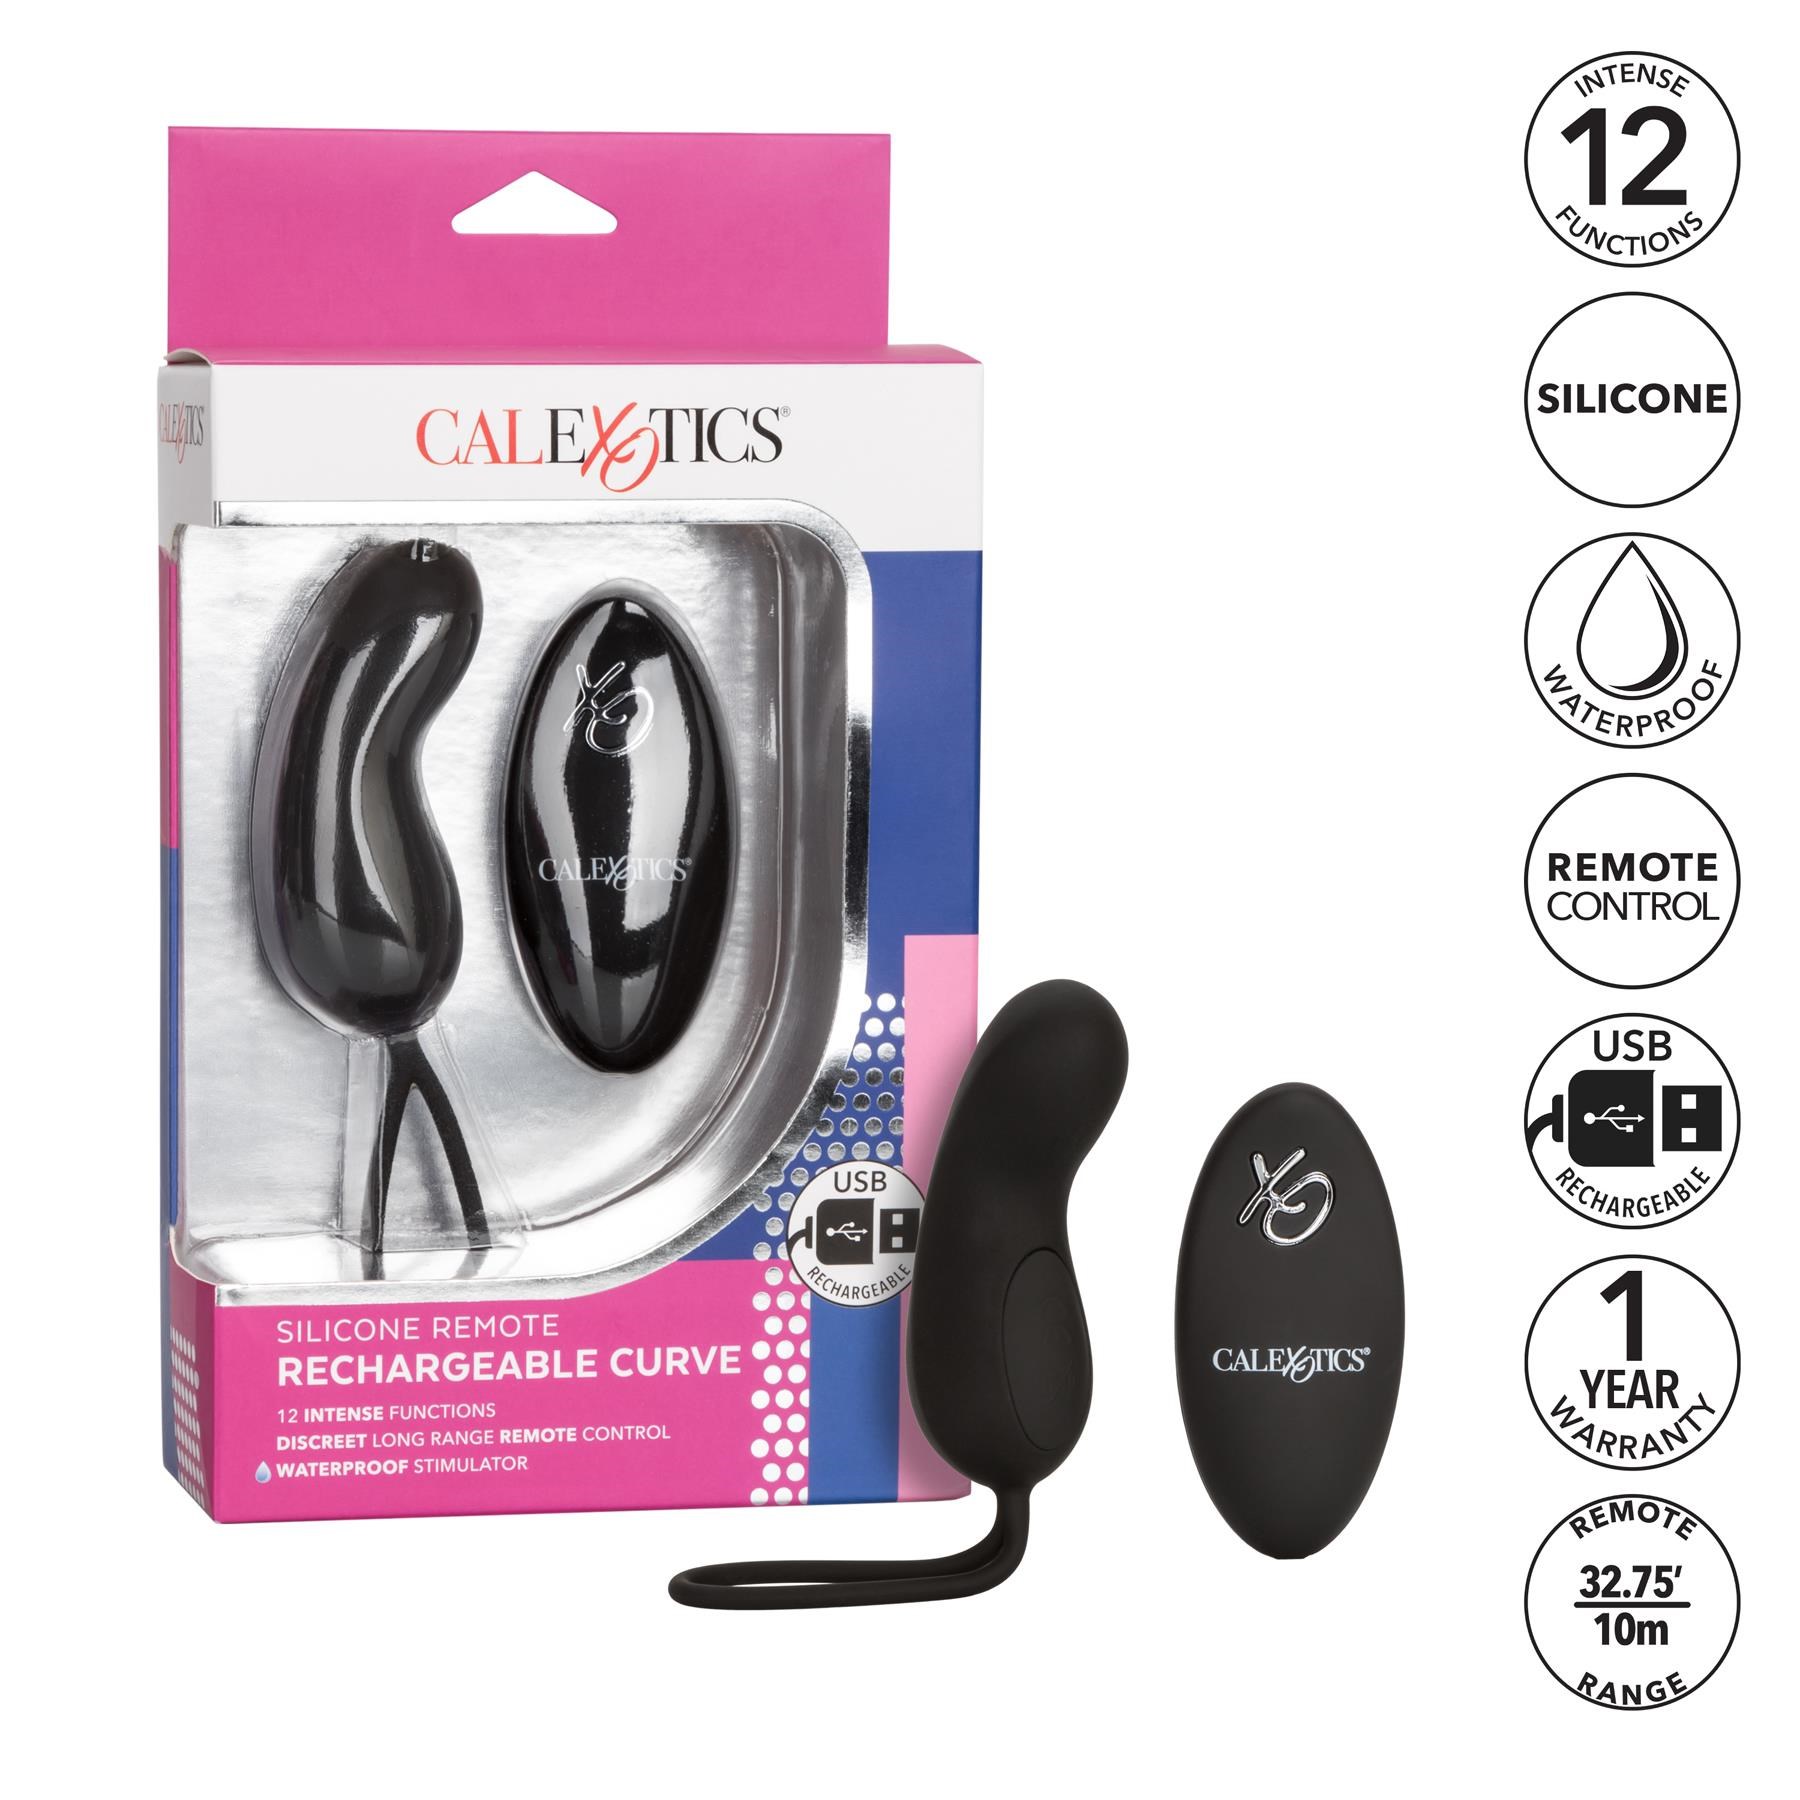 Silicone Remote Rechargeable Curve Bullet - Features